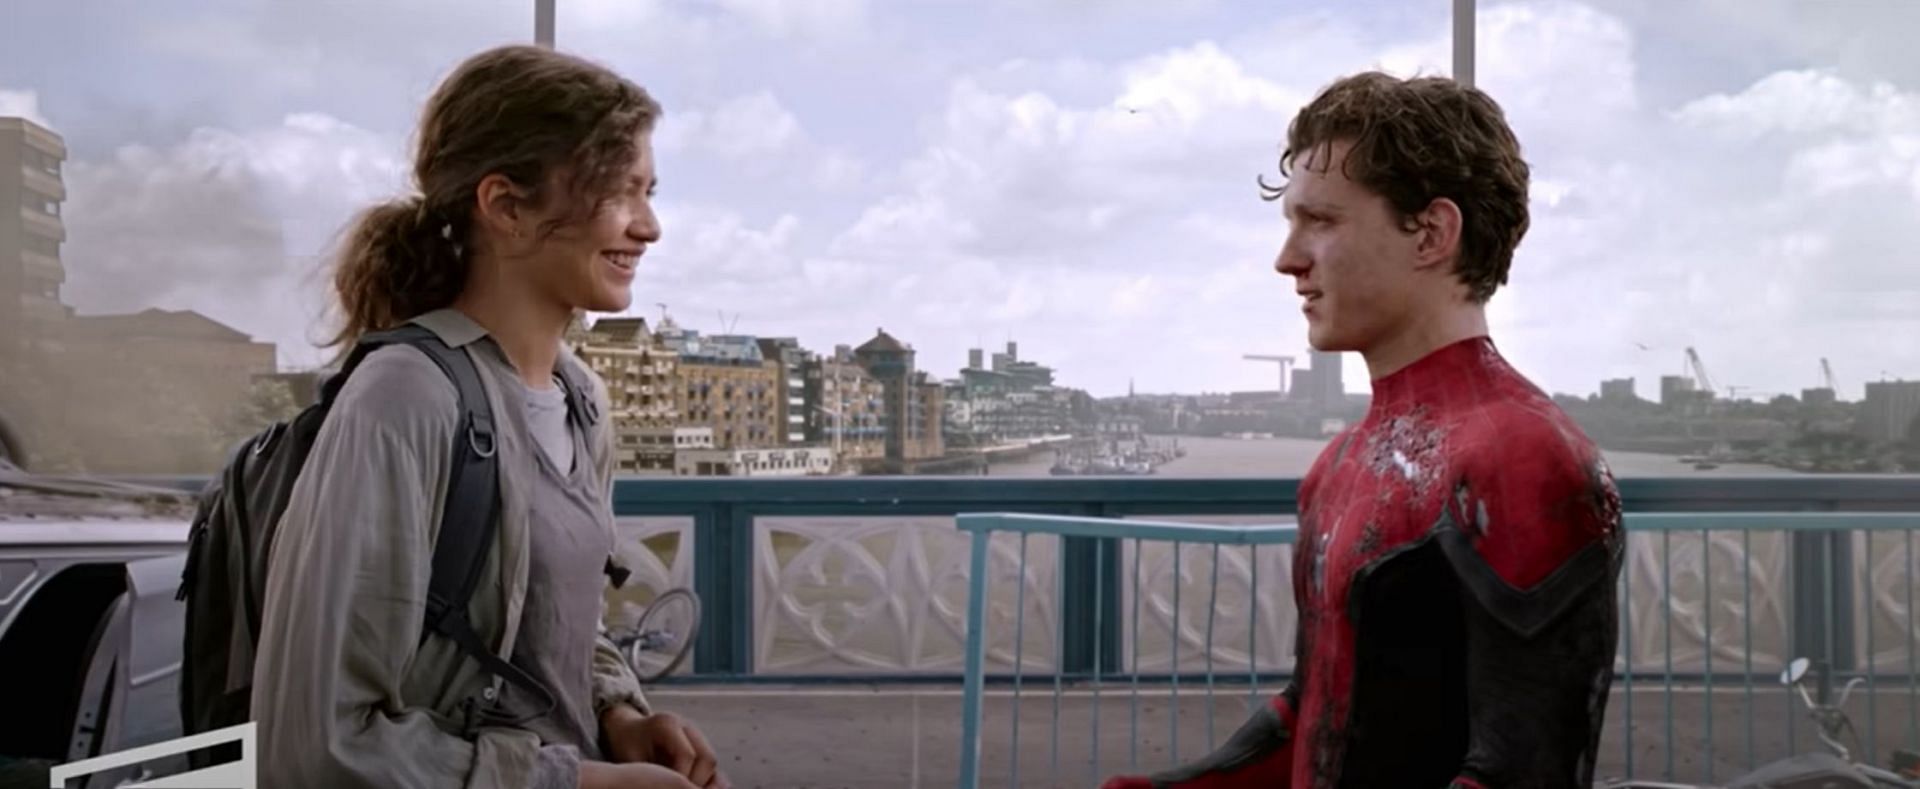 Location London in Far From Home (Image via Marvel)